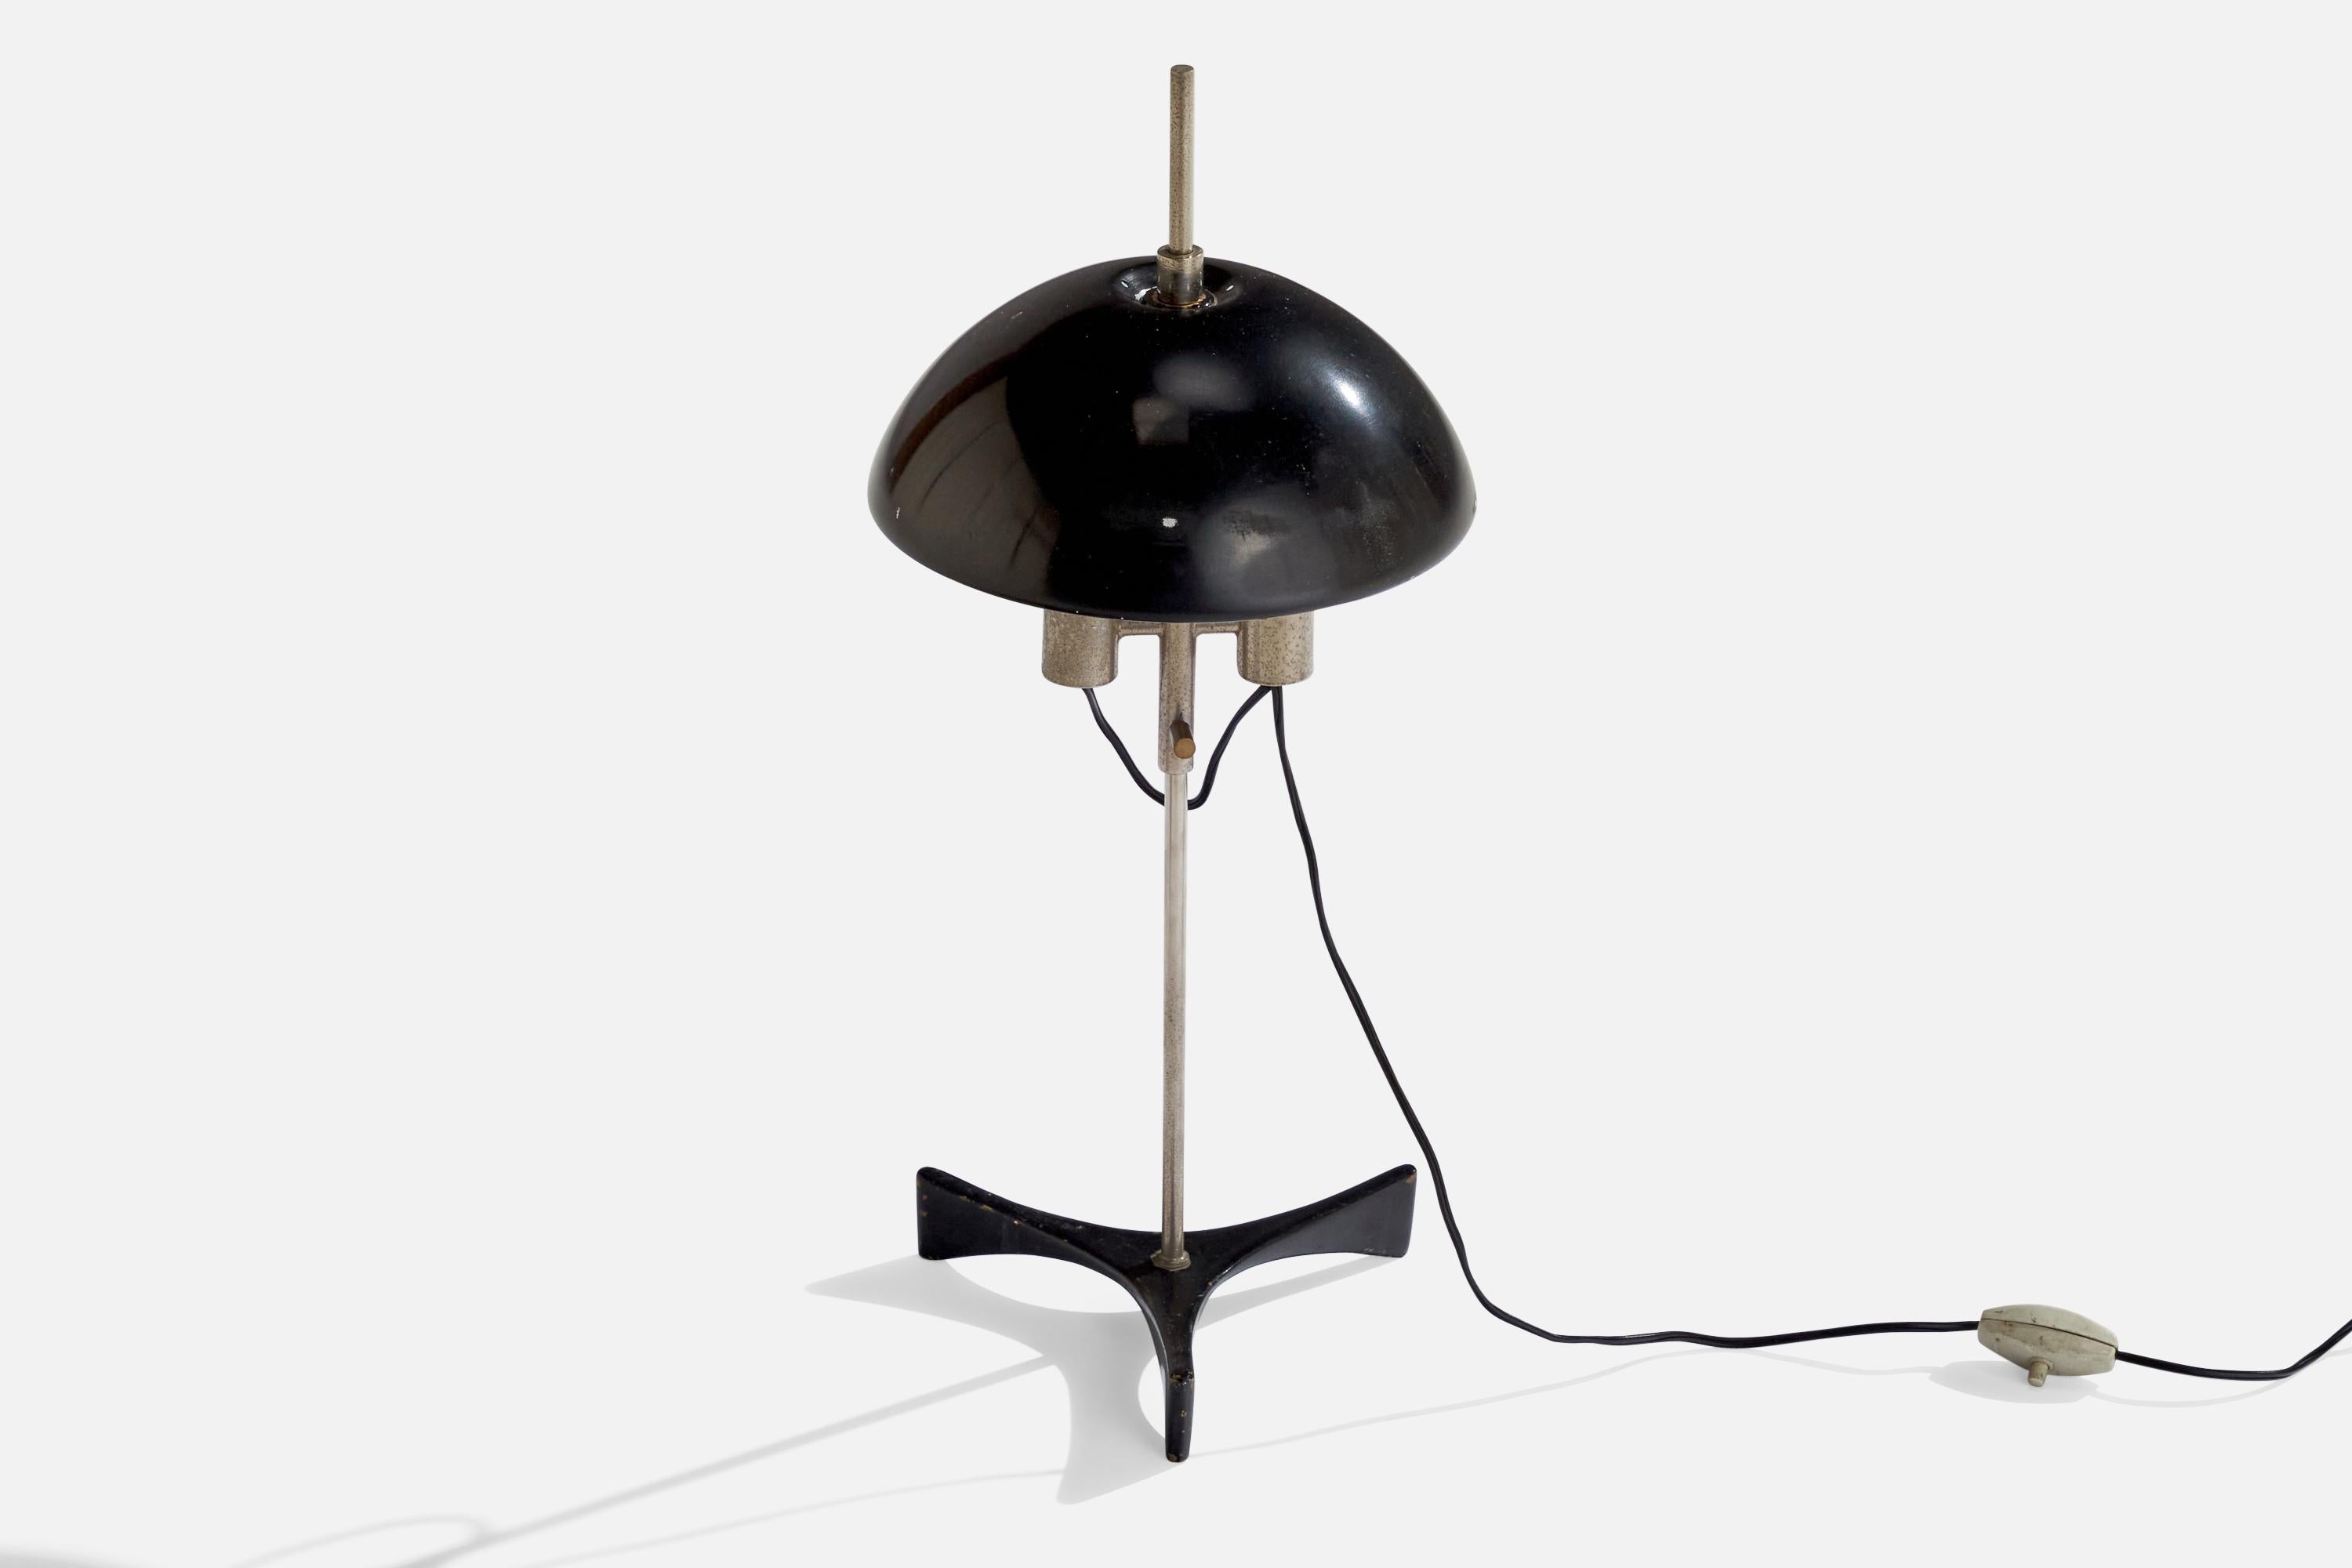 A steel and black-lacquered metal table lamp designed and produced in Italy, 1950s.

Overall Dimensions (inches): 19 “ H x 7.75 “ Diameter 
Bulb Specifications: E-14 Bulb
Number of Sockets: 2
All lighting will be converted for US usage. We is unable